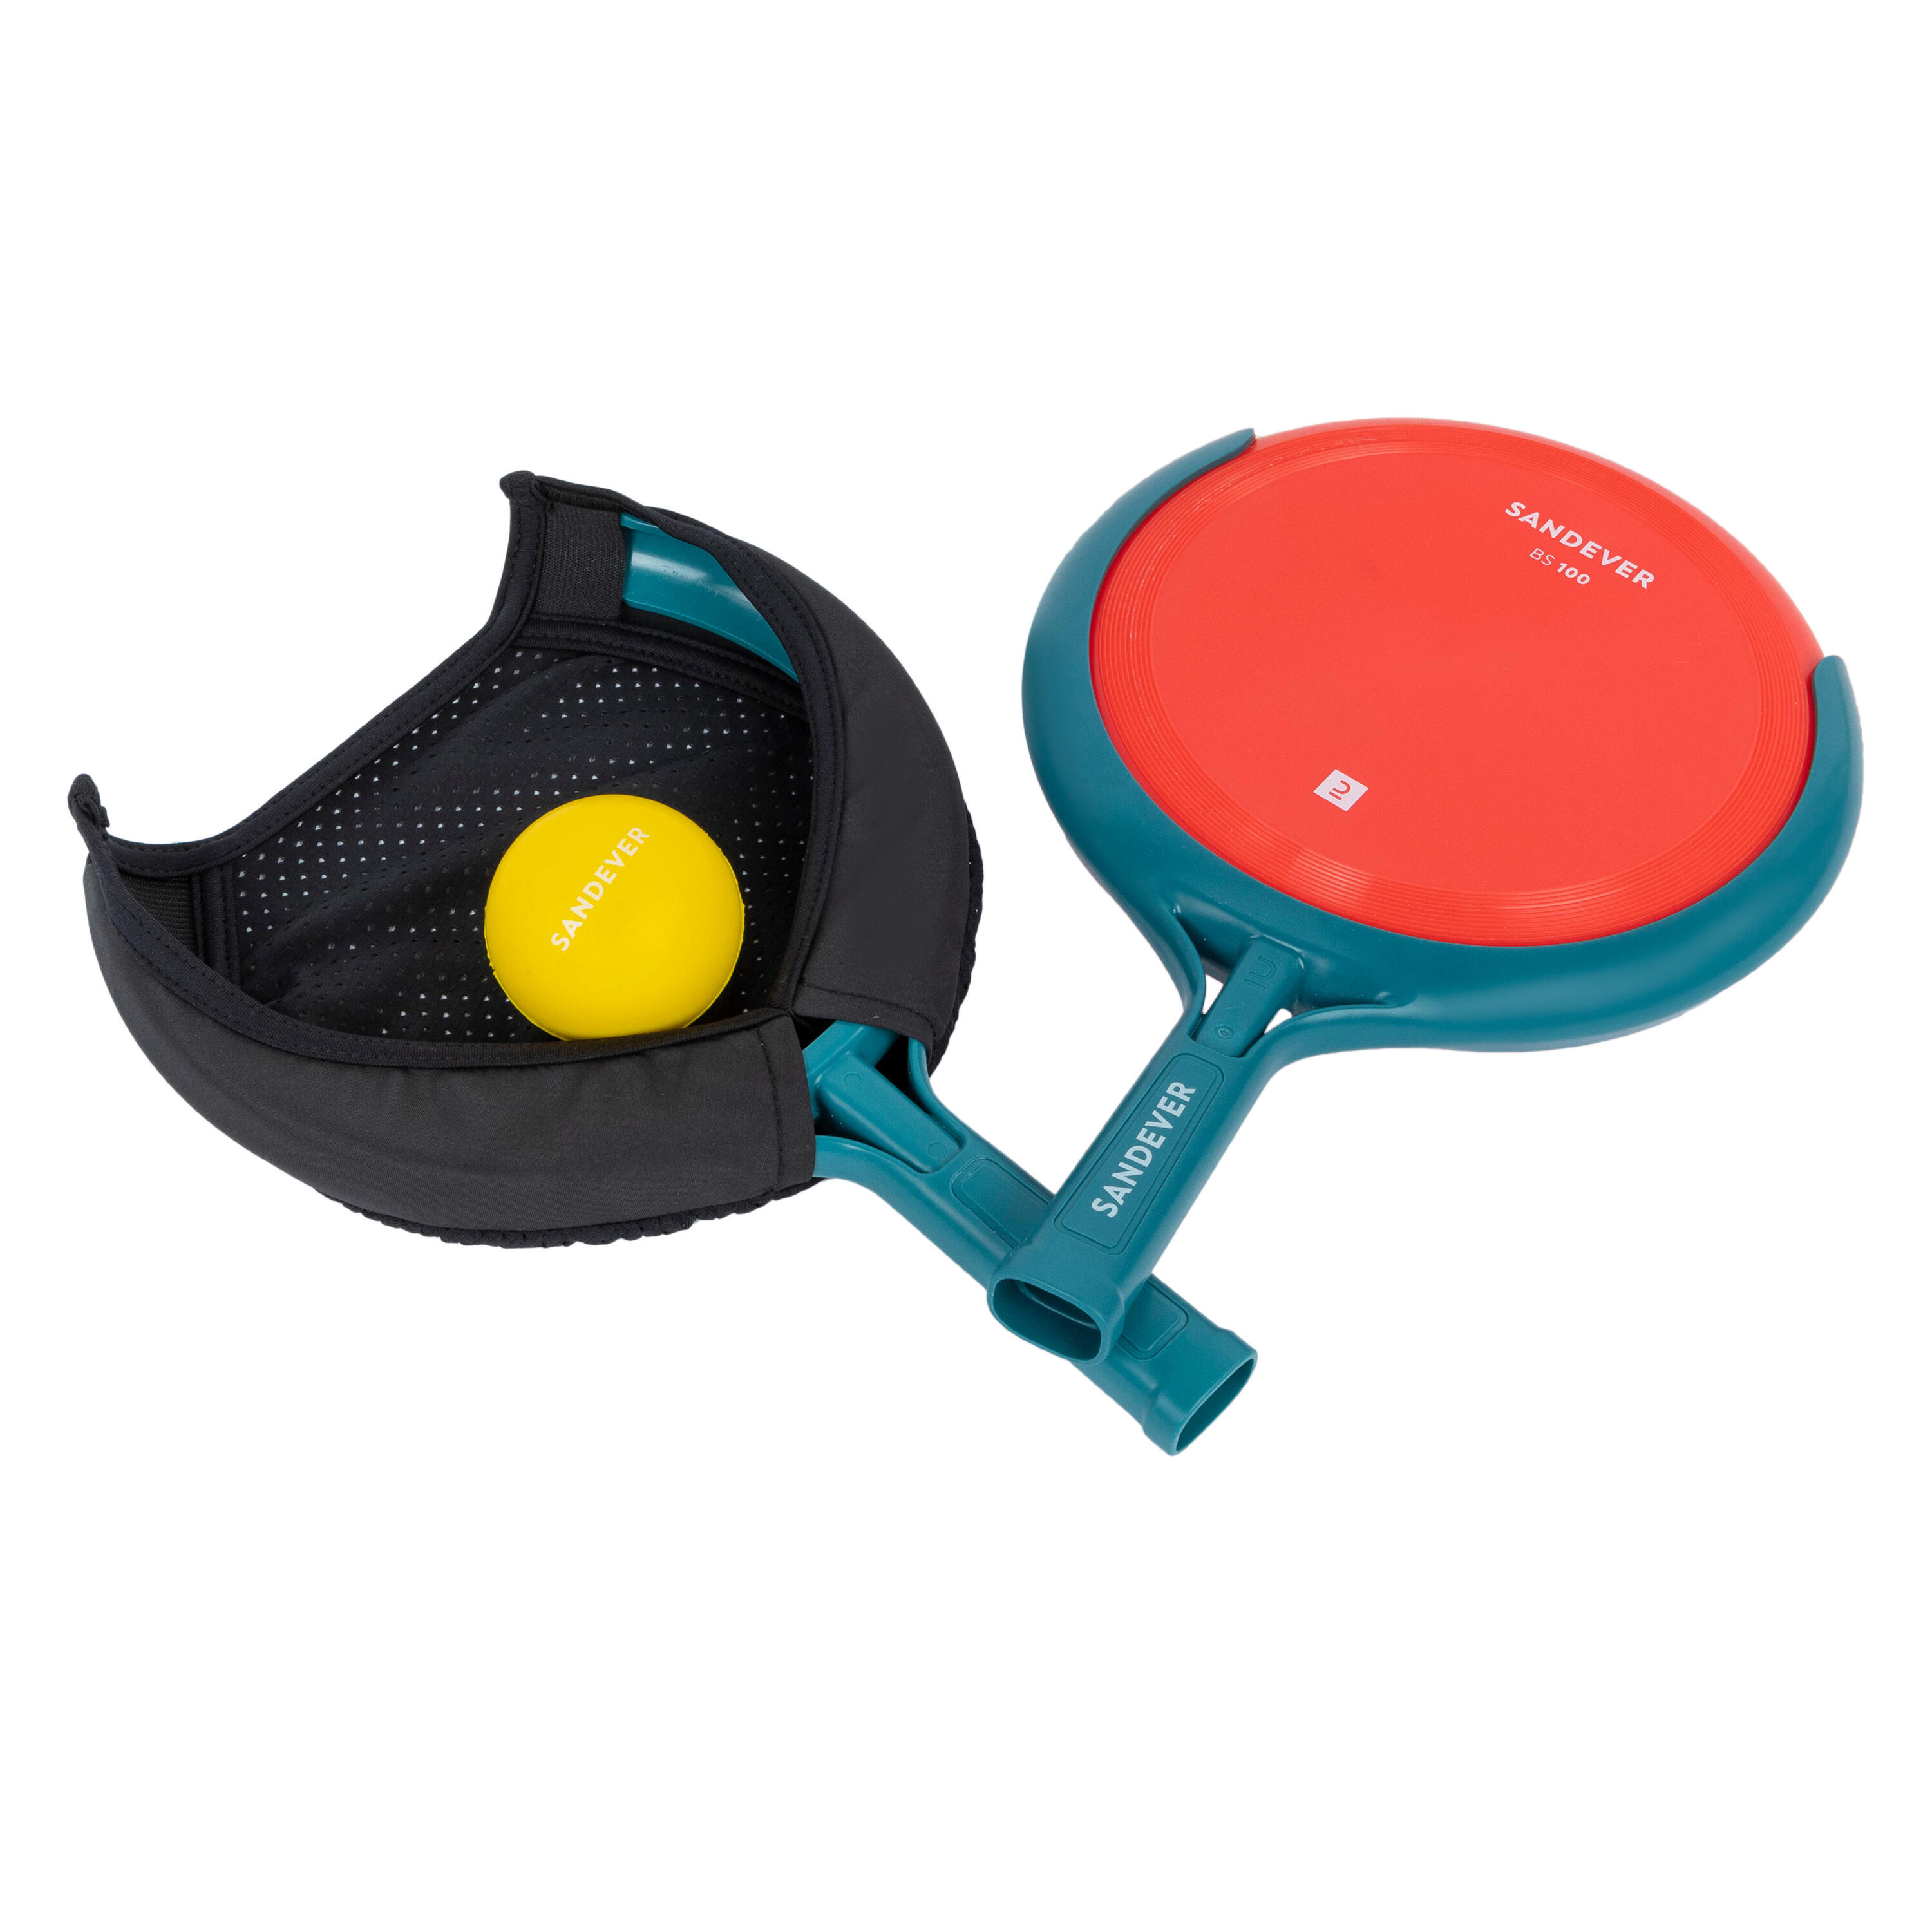 3-in-1 Game Set: flying discs/racket sports/ball catcher. 2/9